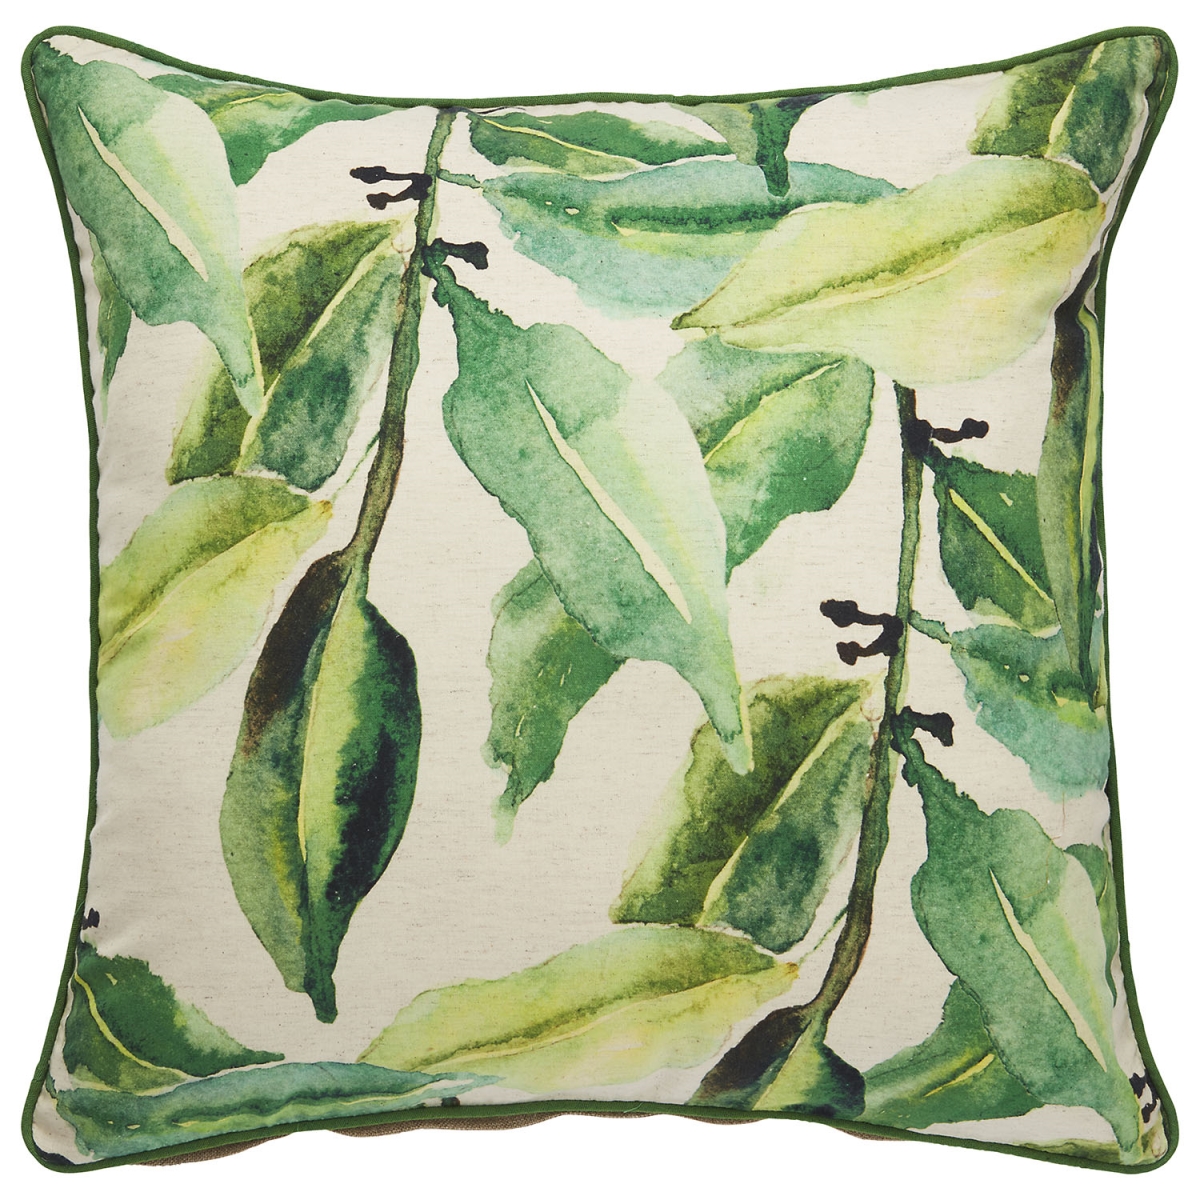 Plw102863 22 X 22 In. Verdigris Jade Green & White Floral Poly Throw Pillow